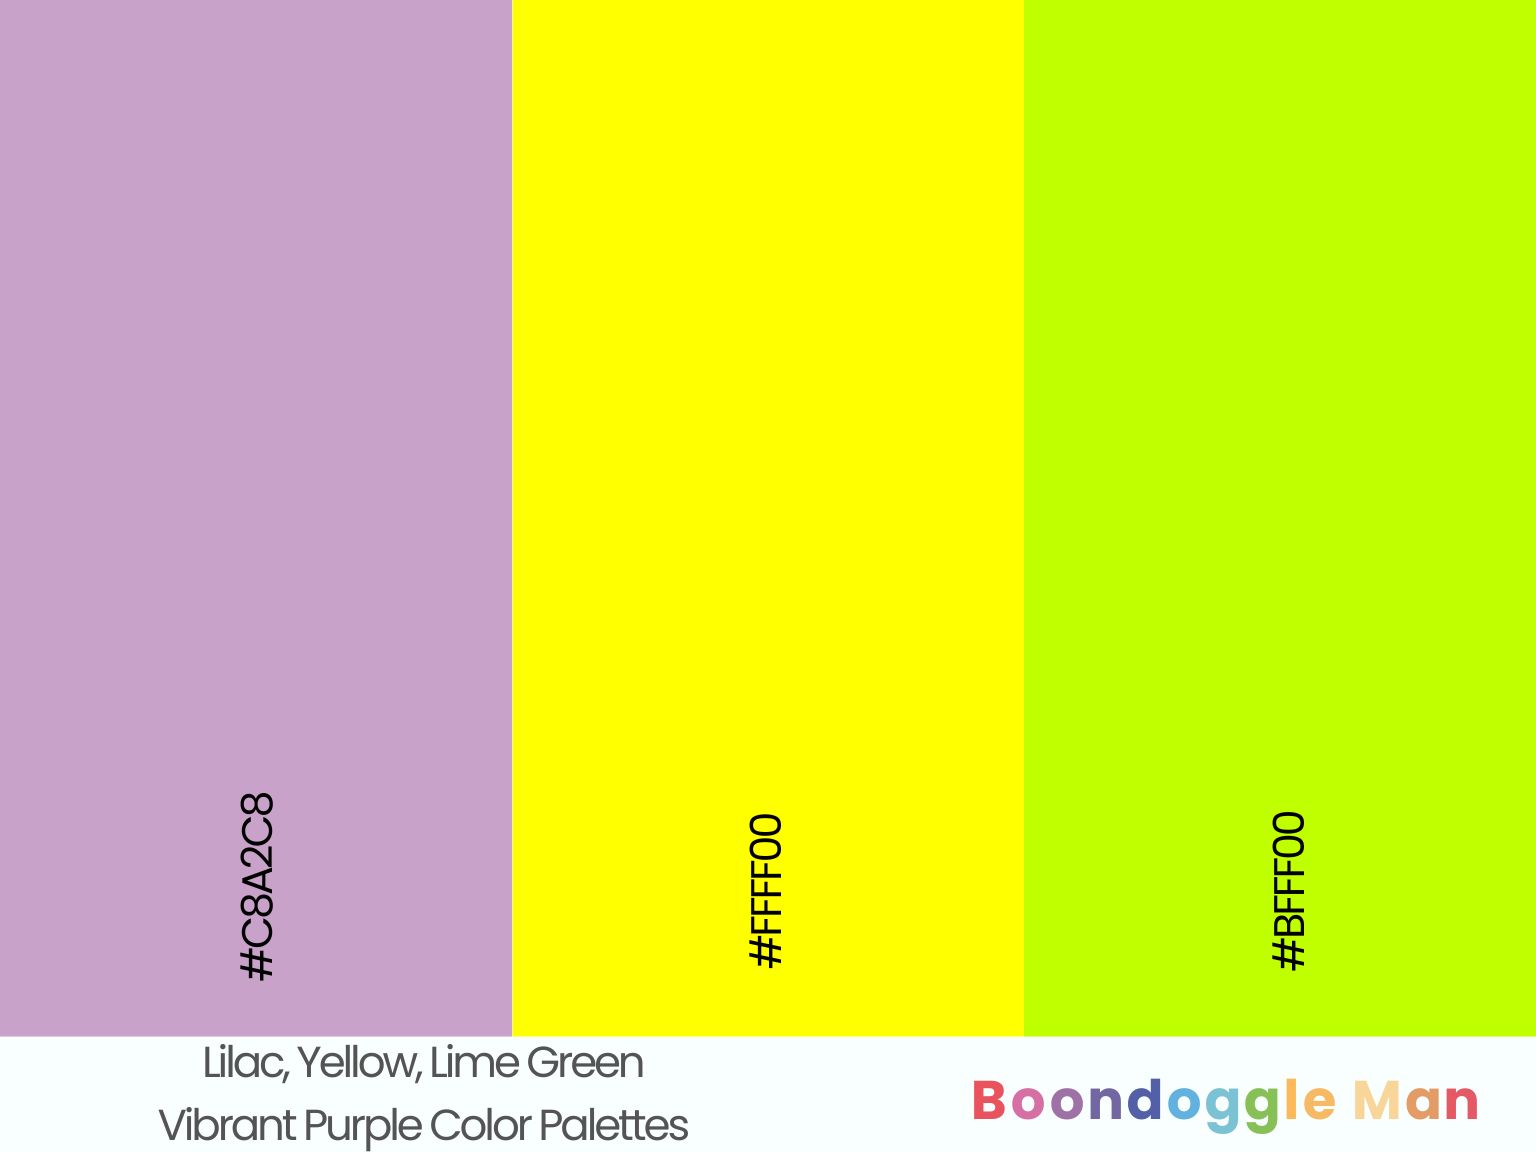 Lilac, Yellow, Lime Green